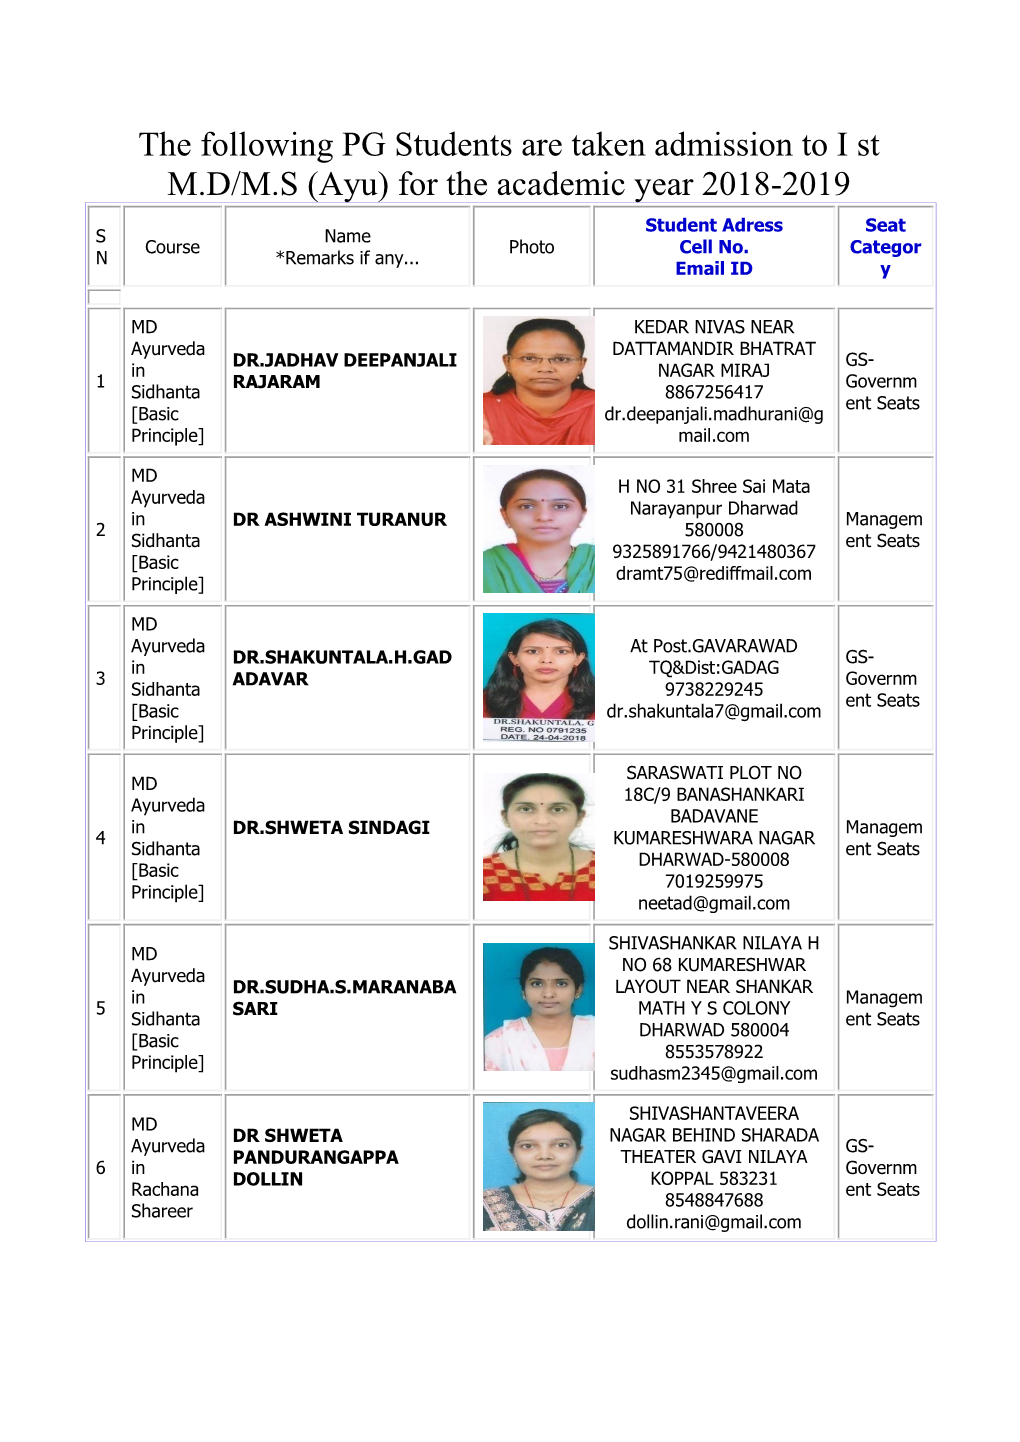 The Following PG Students Are Taken Admission to I St M.D/M.S (Ayu) for the Academic Year 2018-2019 Student Adress Seat S Name Course Photo Cell No